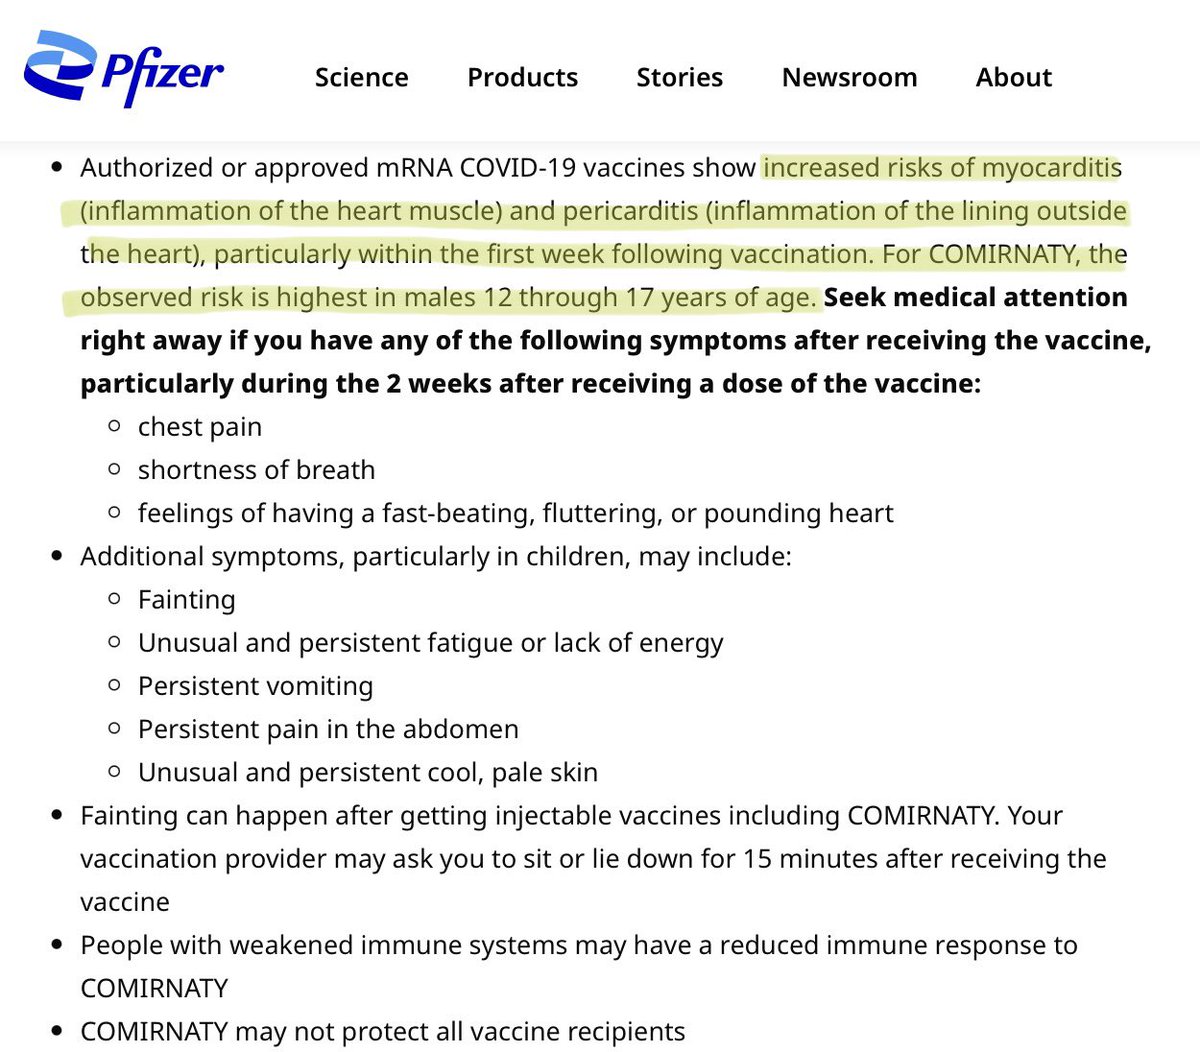 🔥Pfizer issued a press release Friday afternoon stating definitively that mRNA covid vaccines “show increased risks” of myocarditis + pericarditis. Highest risk = adolescent males. It’s INEXCUSABLE that 1000s of college kids are STILL forced to get a shot w/these known risks.